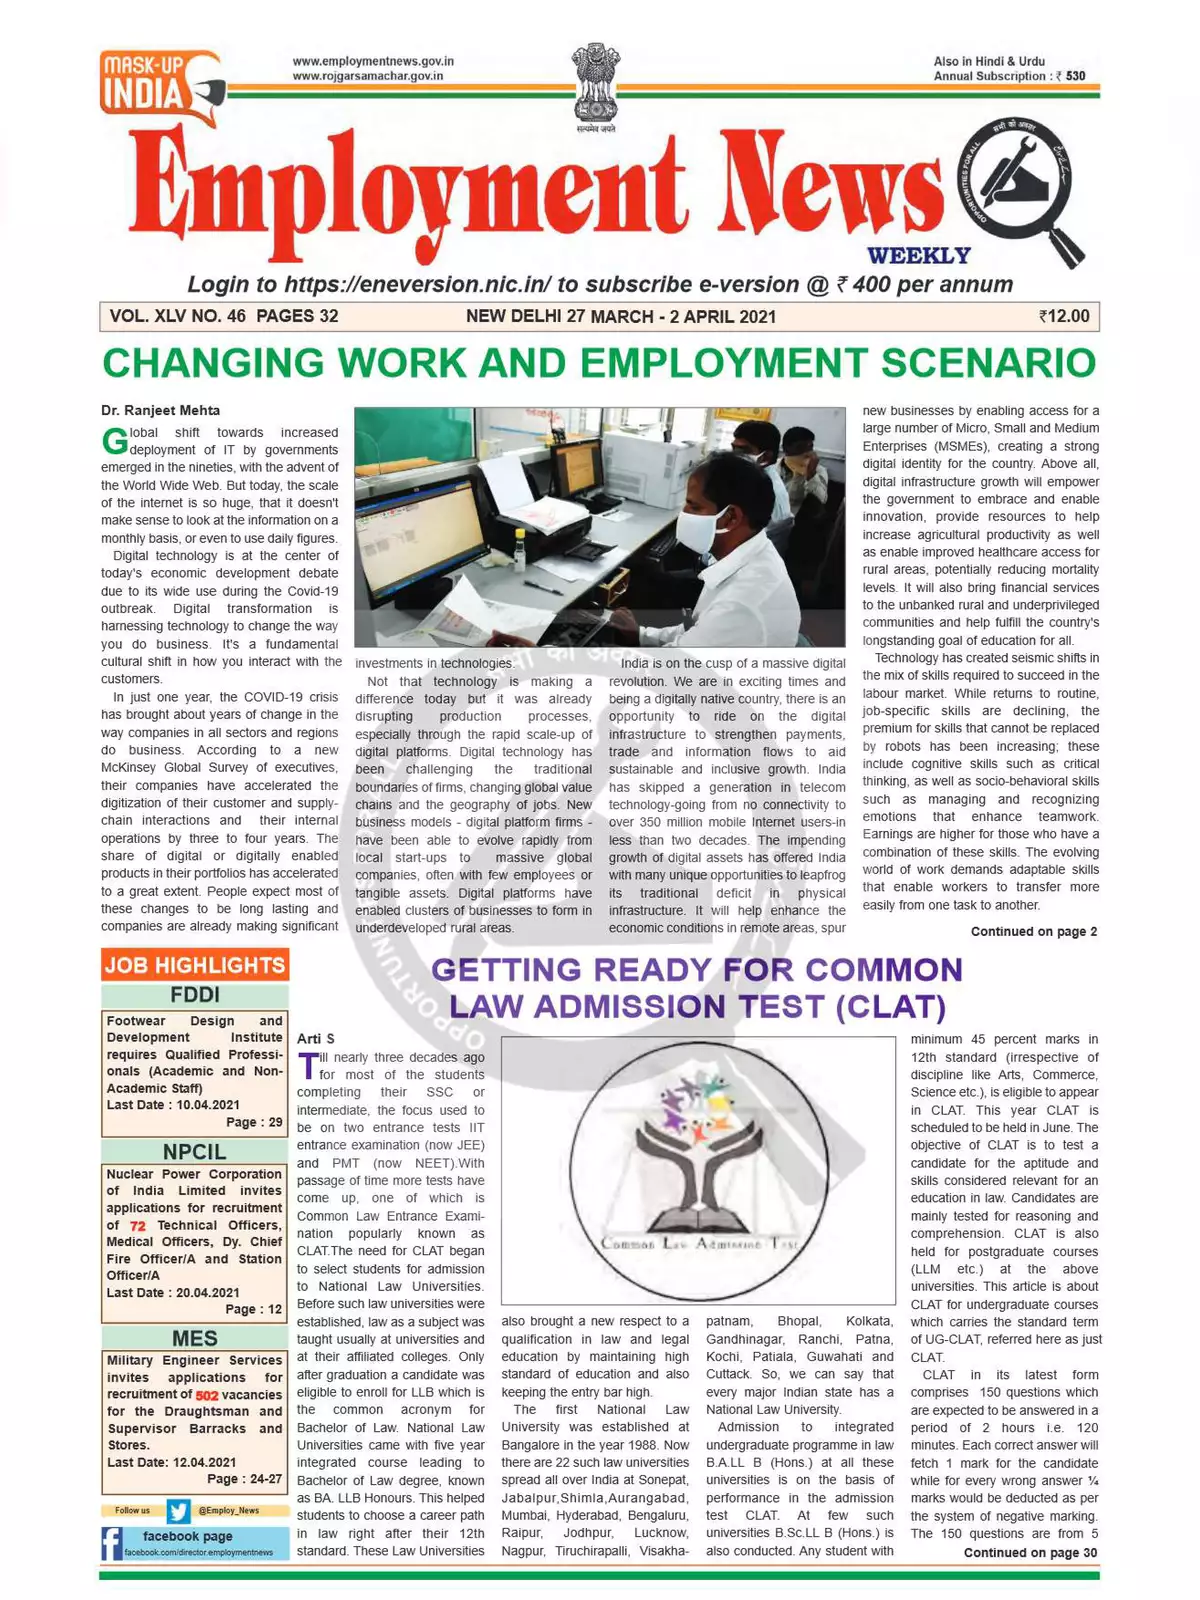 Employment Newspaper Fifth Week of March 2021